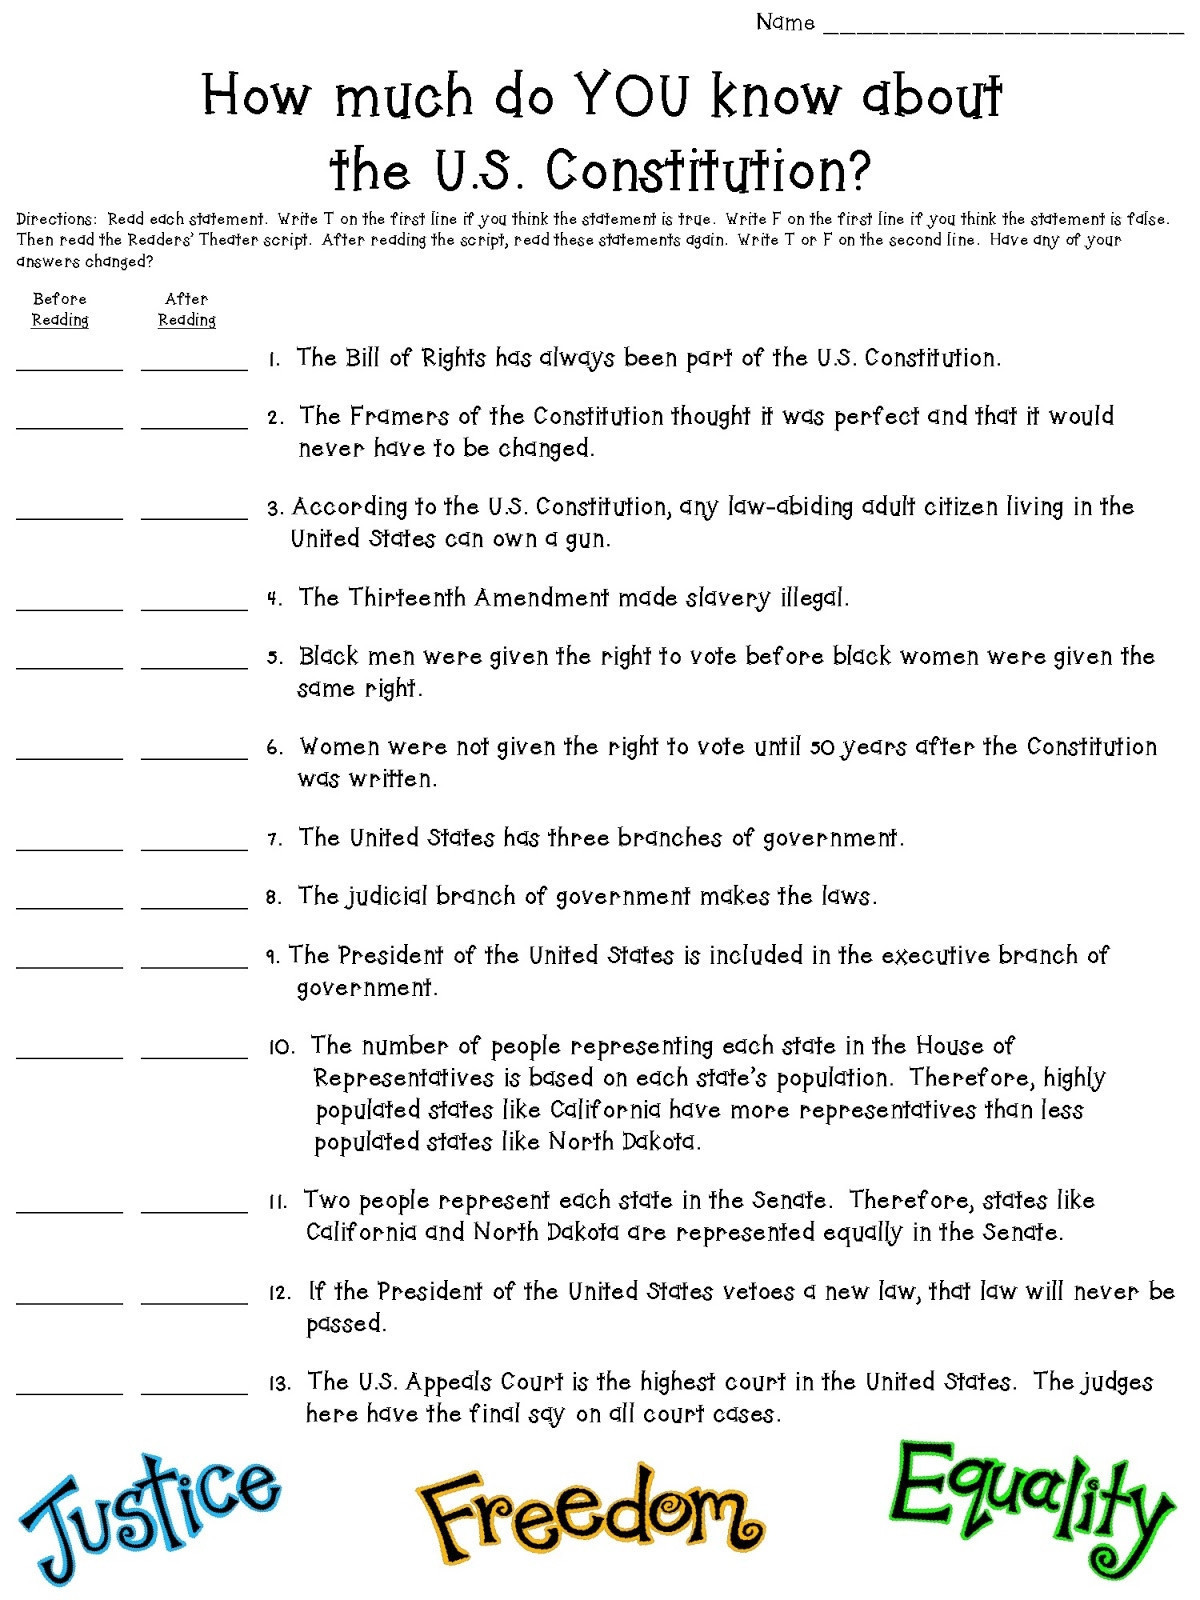 The Us Constitution Worksheet Answers Awesome Constitution Worksheet Answers